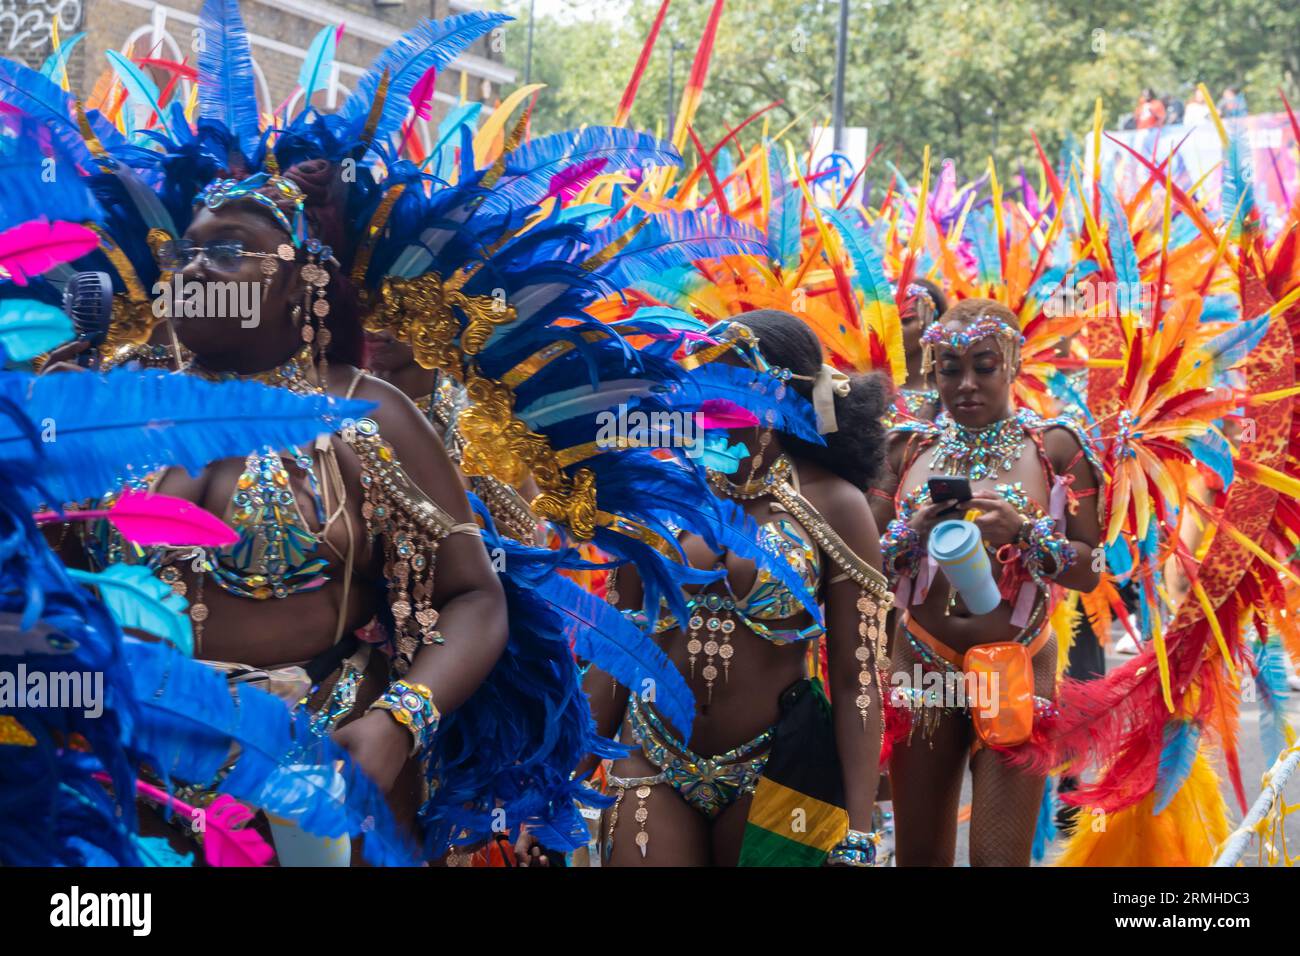 Notting Hill, London, England. 28th August 2023. Carnival Participants wearing traditional Samba outfits at Notting Hill Carnival 2023. Credit: Jessica Girvan/Alamy Live News Stock Photo